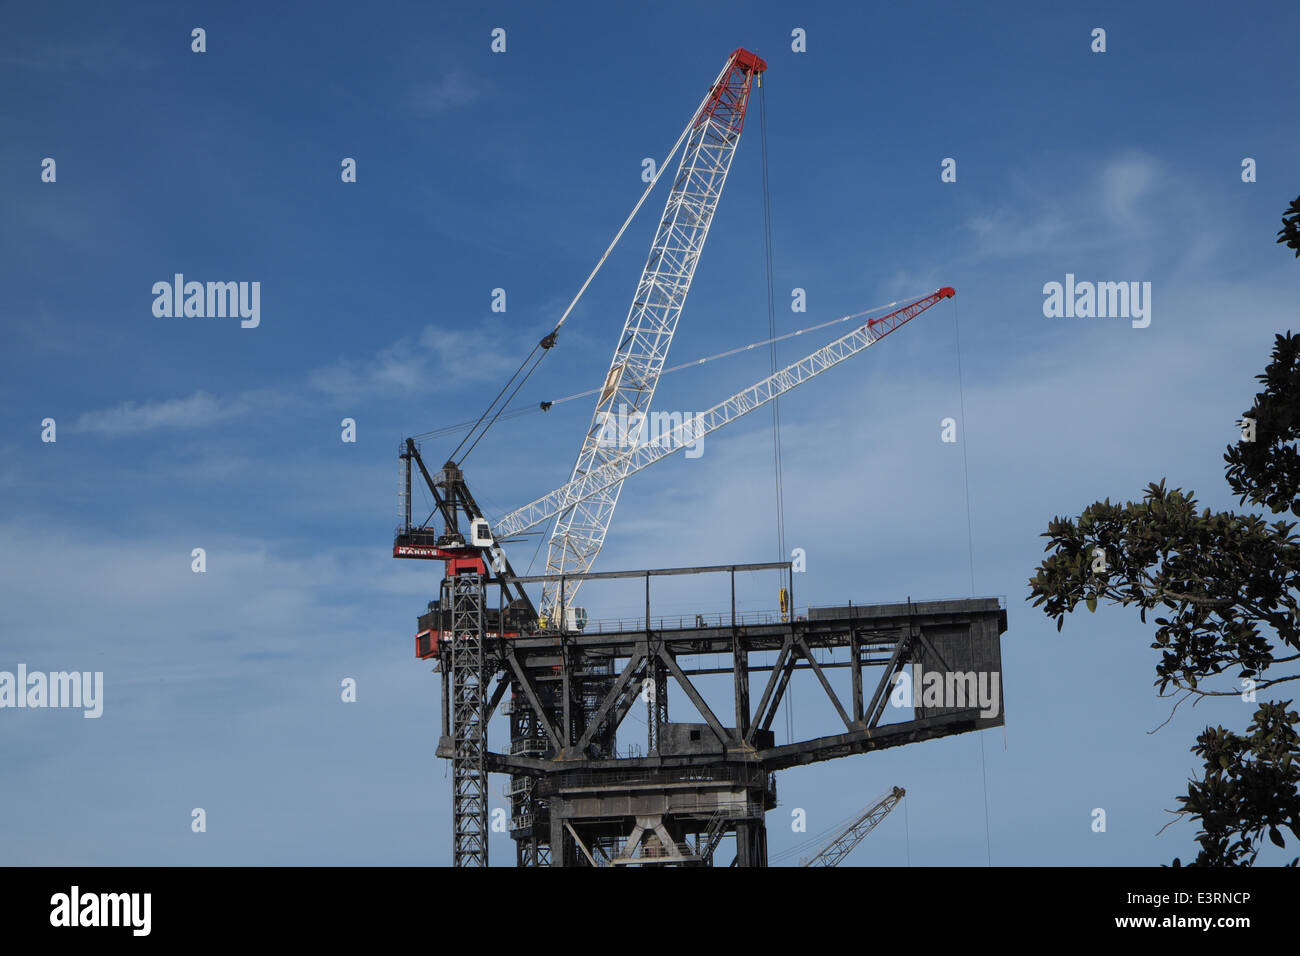 hammerhead crane now being pulled down, at sydney's garden island naval base,new south wales,australia Stock Photo